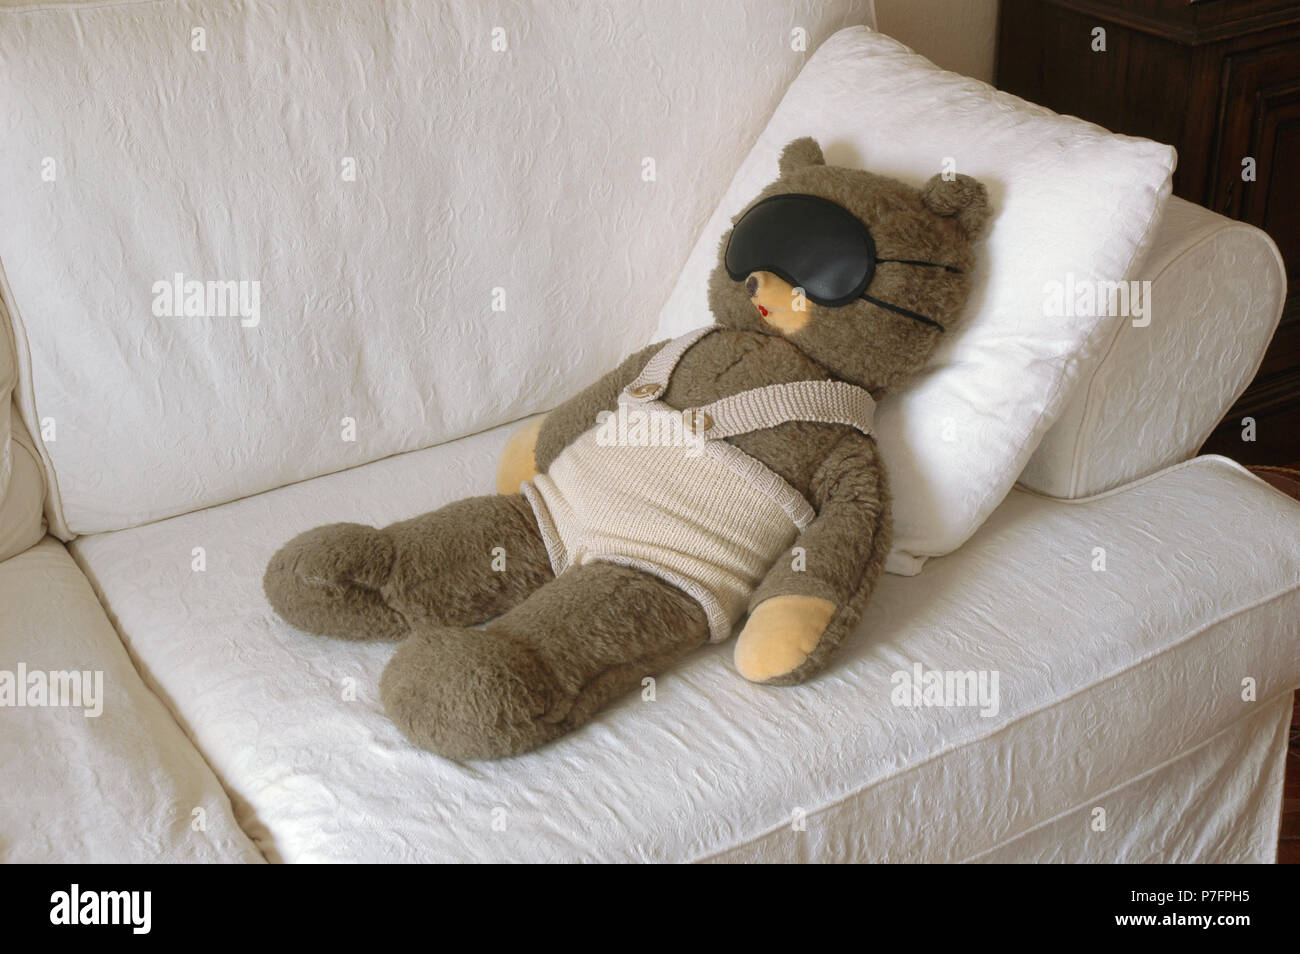 Teddy Bear lies with a sleeping mask on a couch, Germany Stock Photo